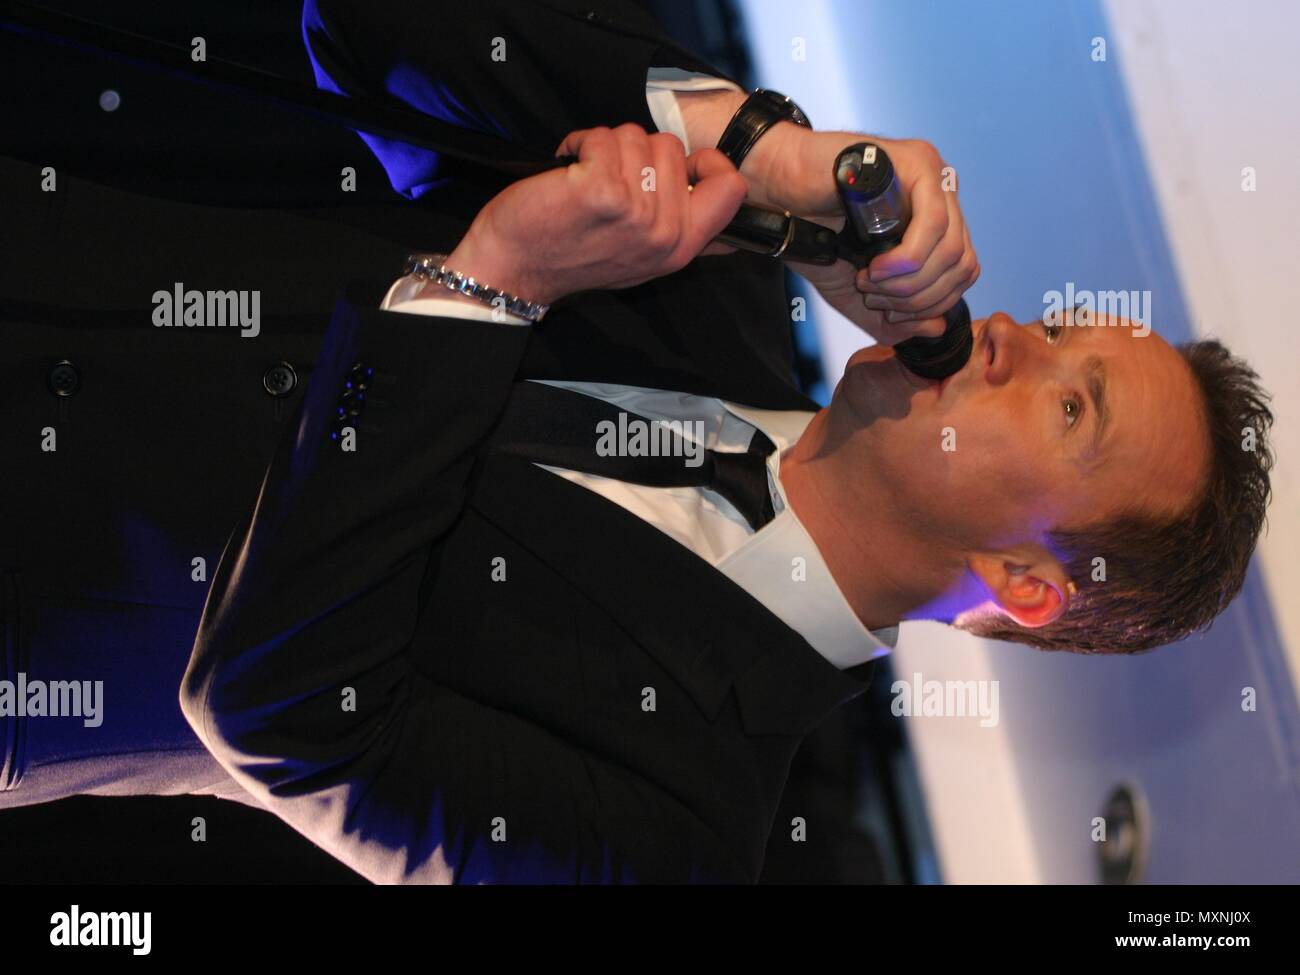 Manchester,uk, Opera singer russel watson performs at Trafford Centre credit Ian Fairbrother/Alamy Stock Photos Stock Photo